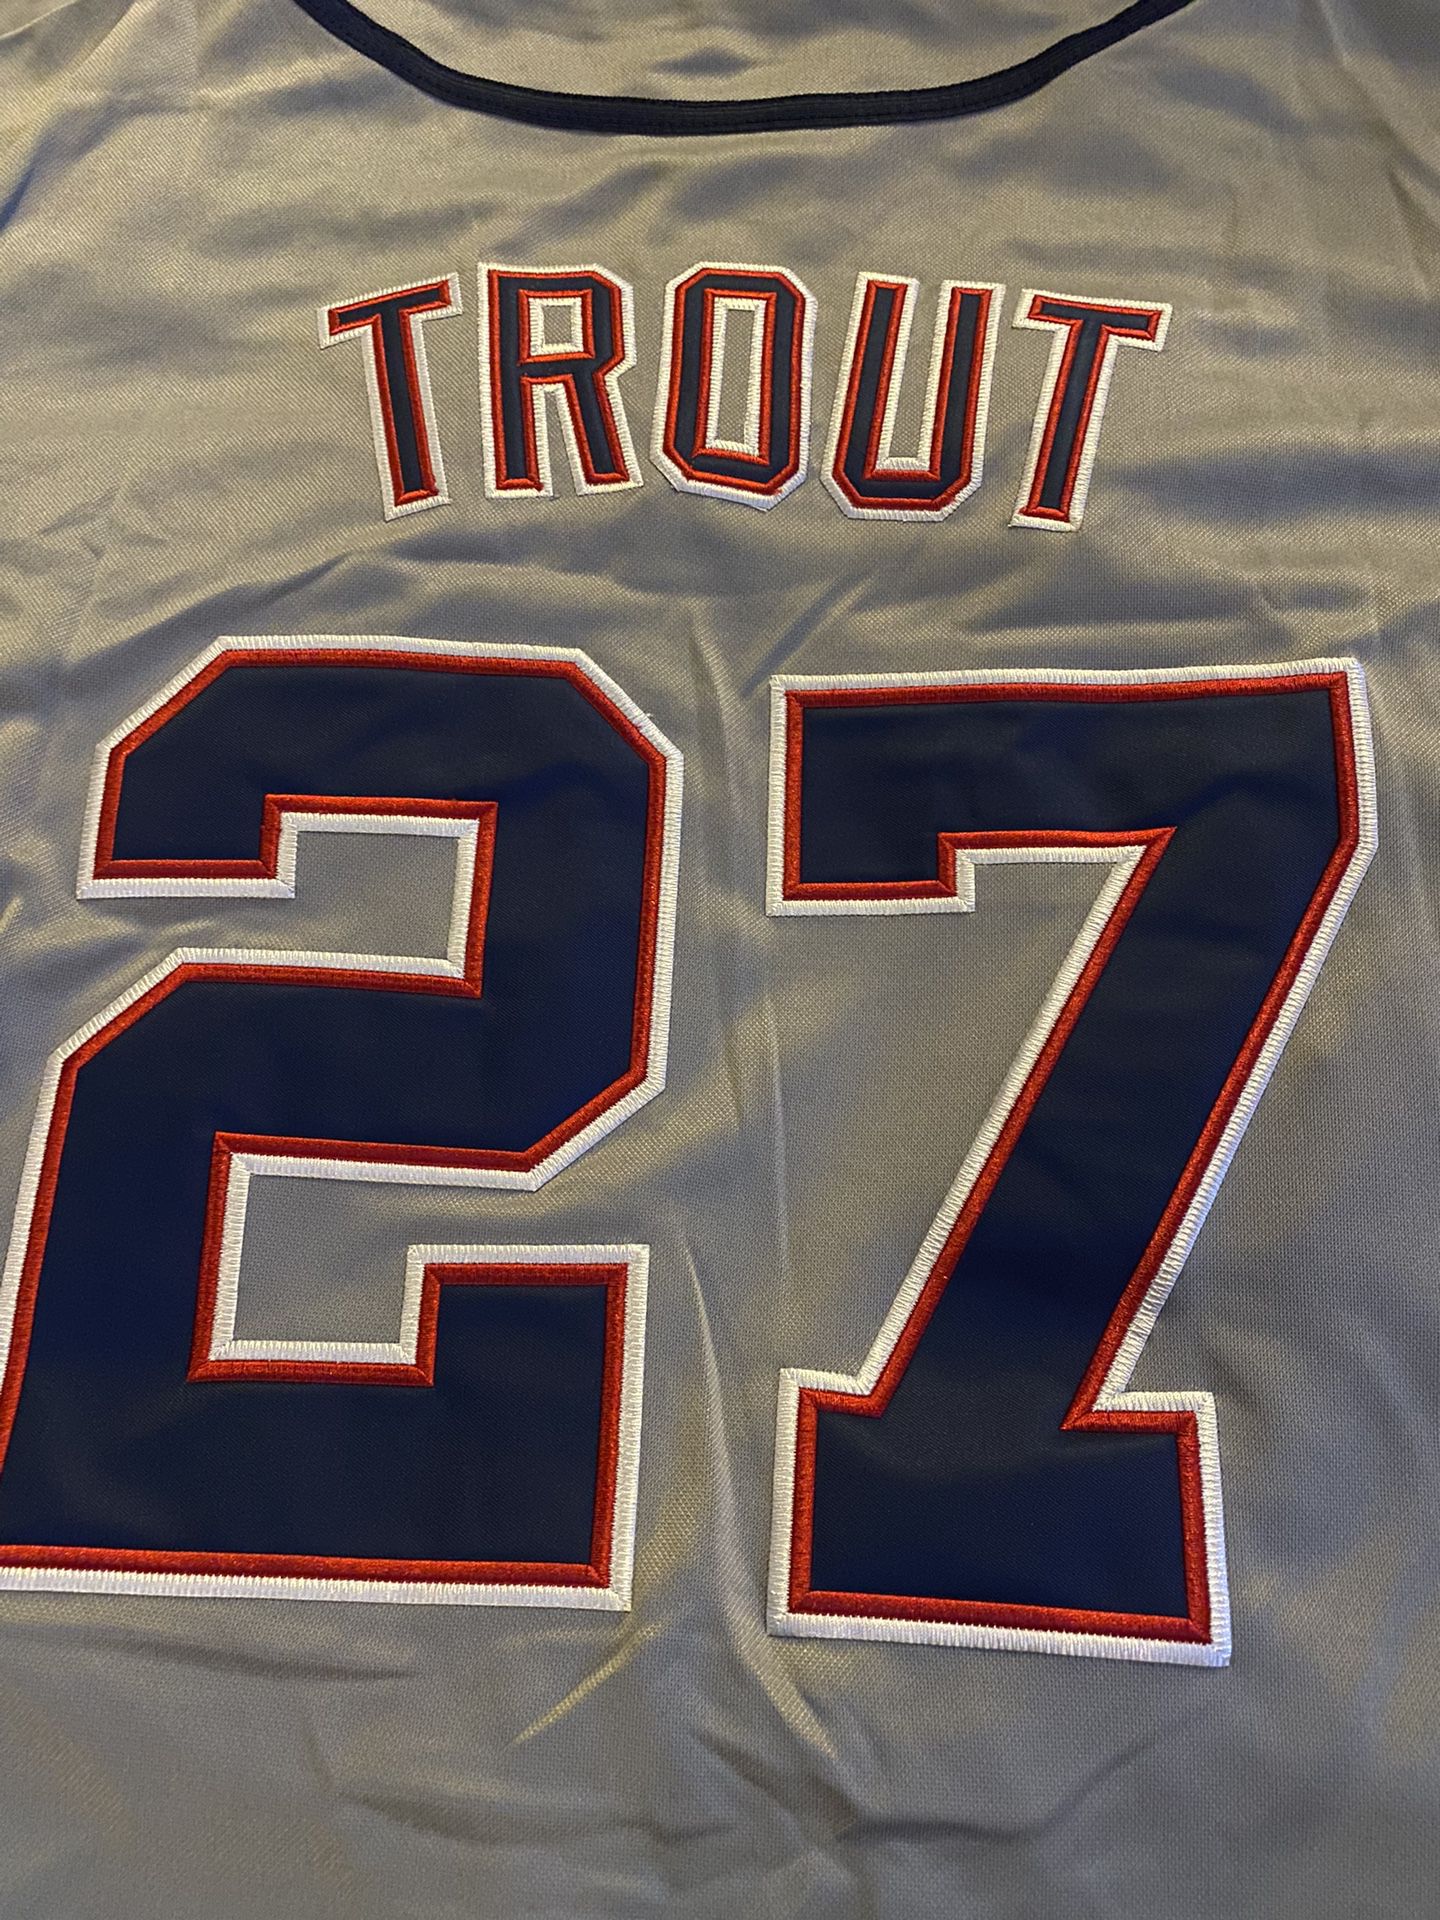 California Angels 1990S Mike Trout #27 Vintage Baseball Jersey Stitched for  Sale in Costa Mesa, CA - OfferUp